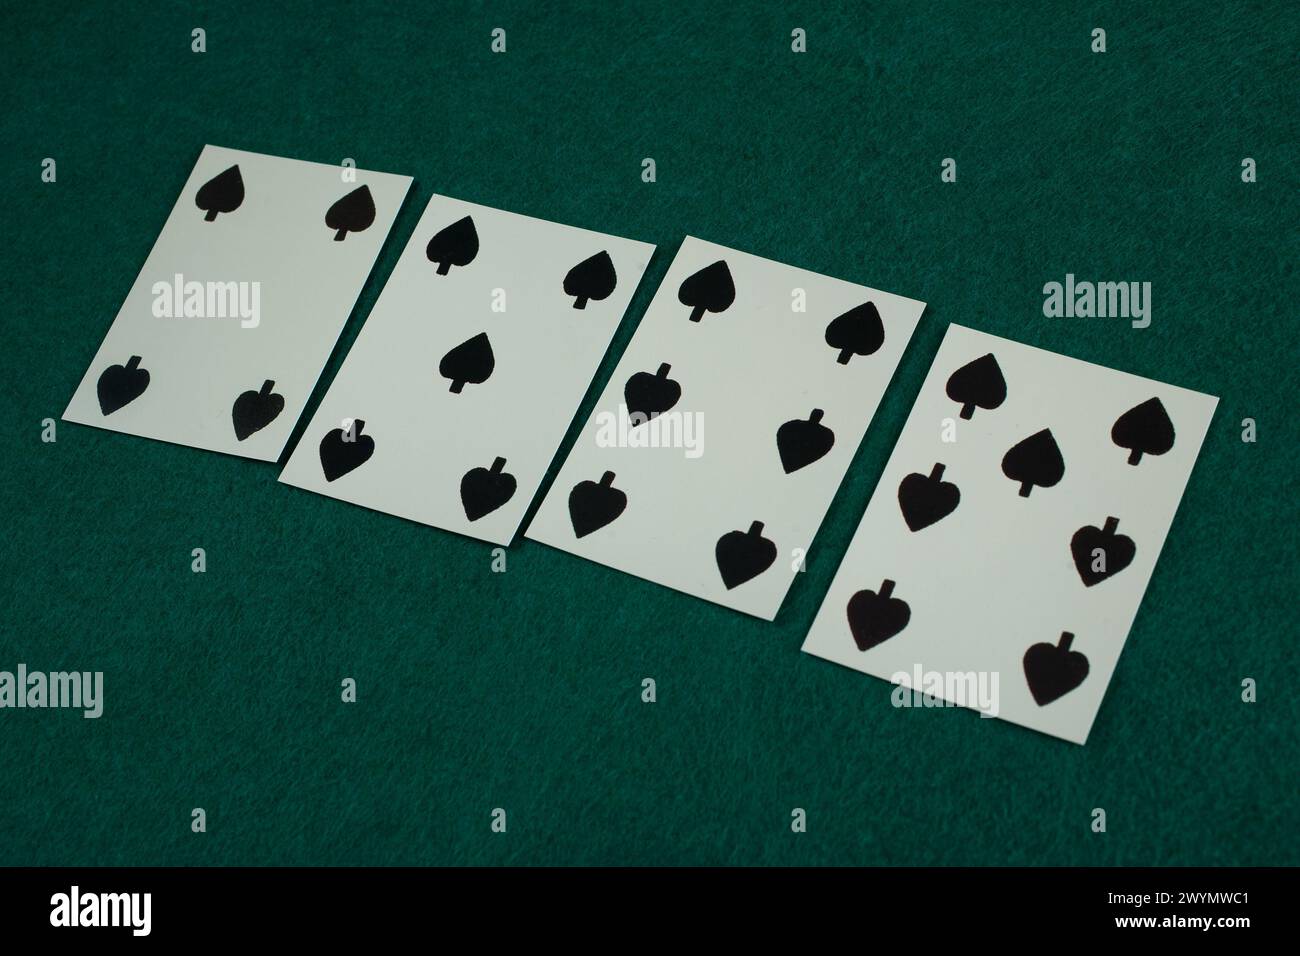 Old west era playing card on green gambling table. 4, 5, 6, 7 of spades. Stock Photo